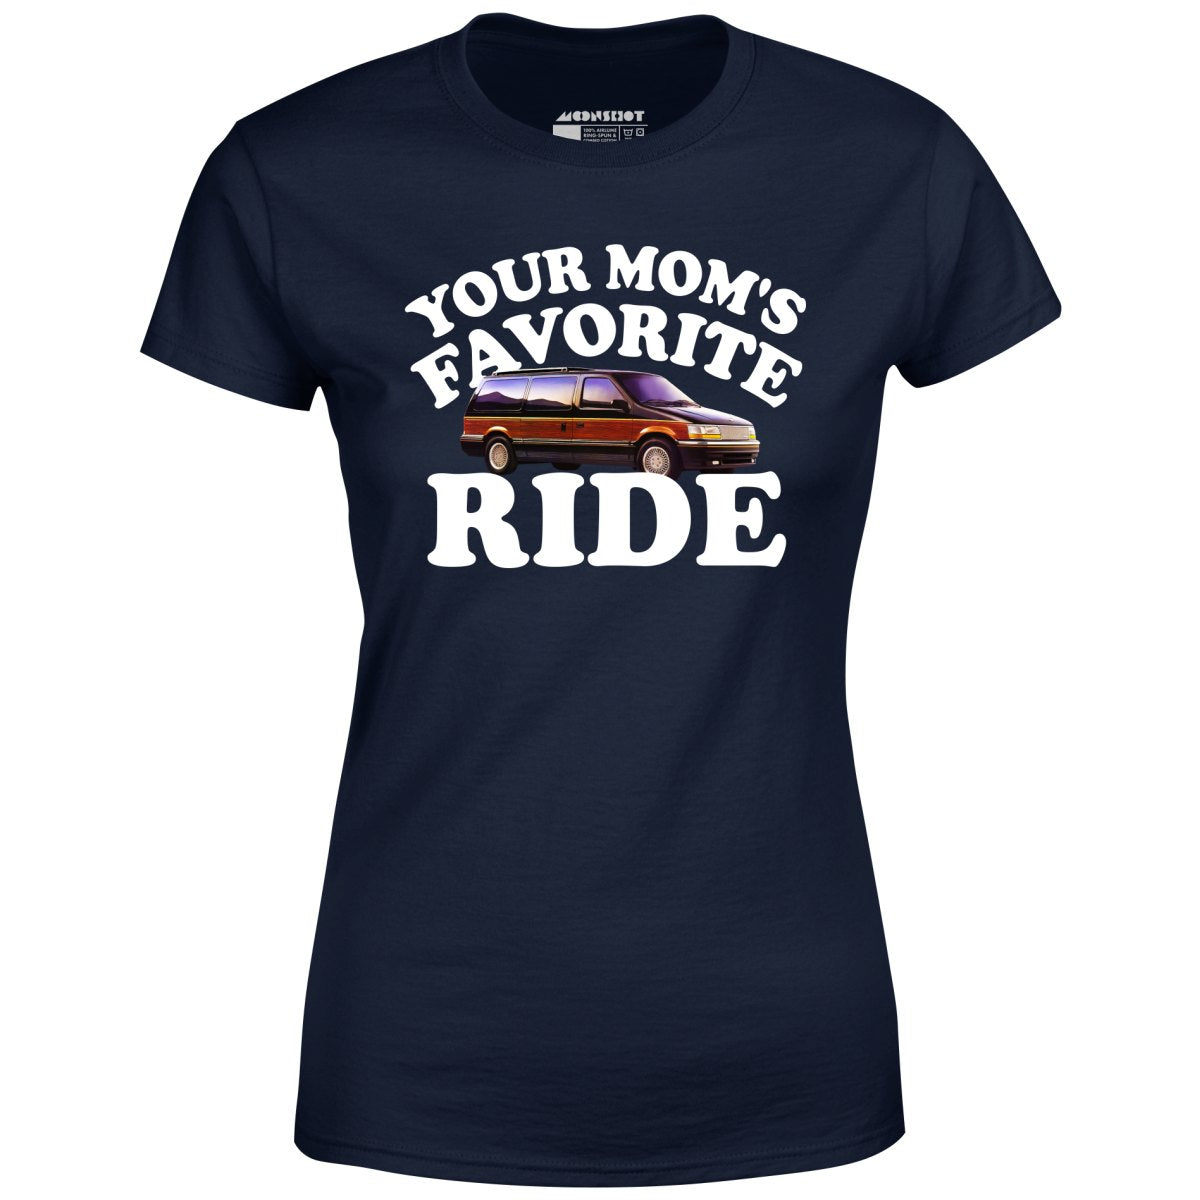 Your Mom's Favorite Ride - Women's T-Shirt